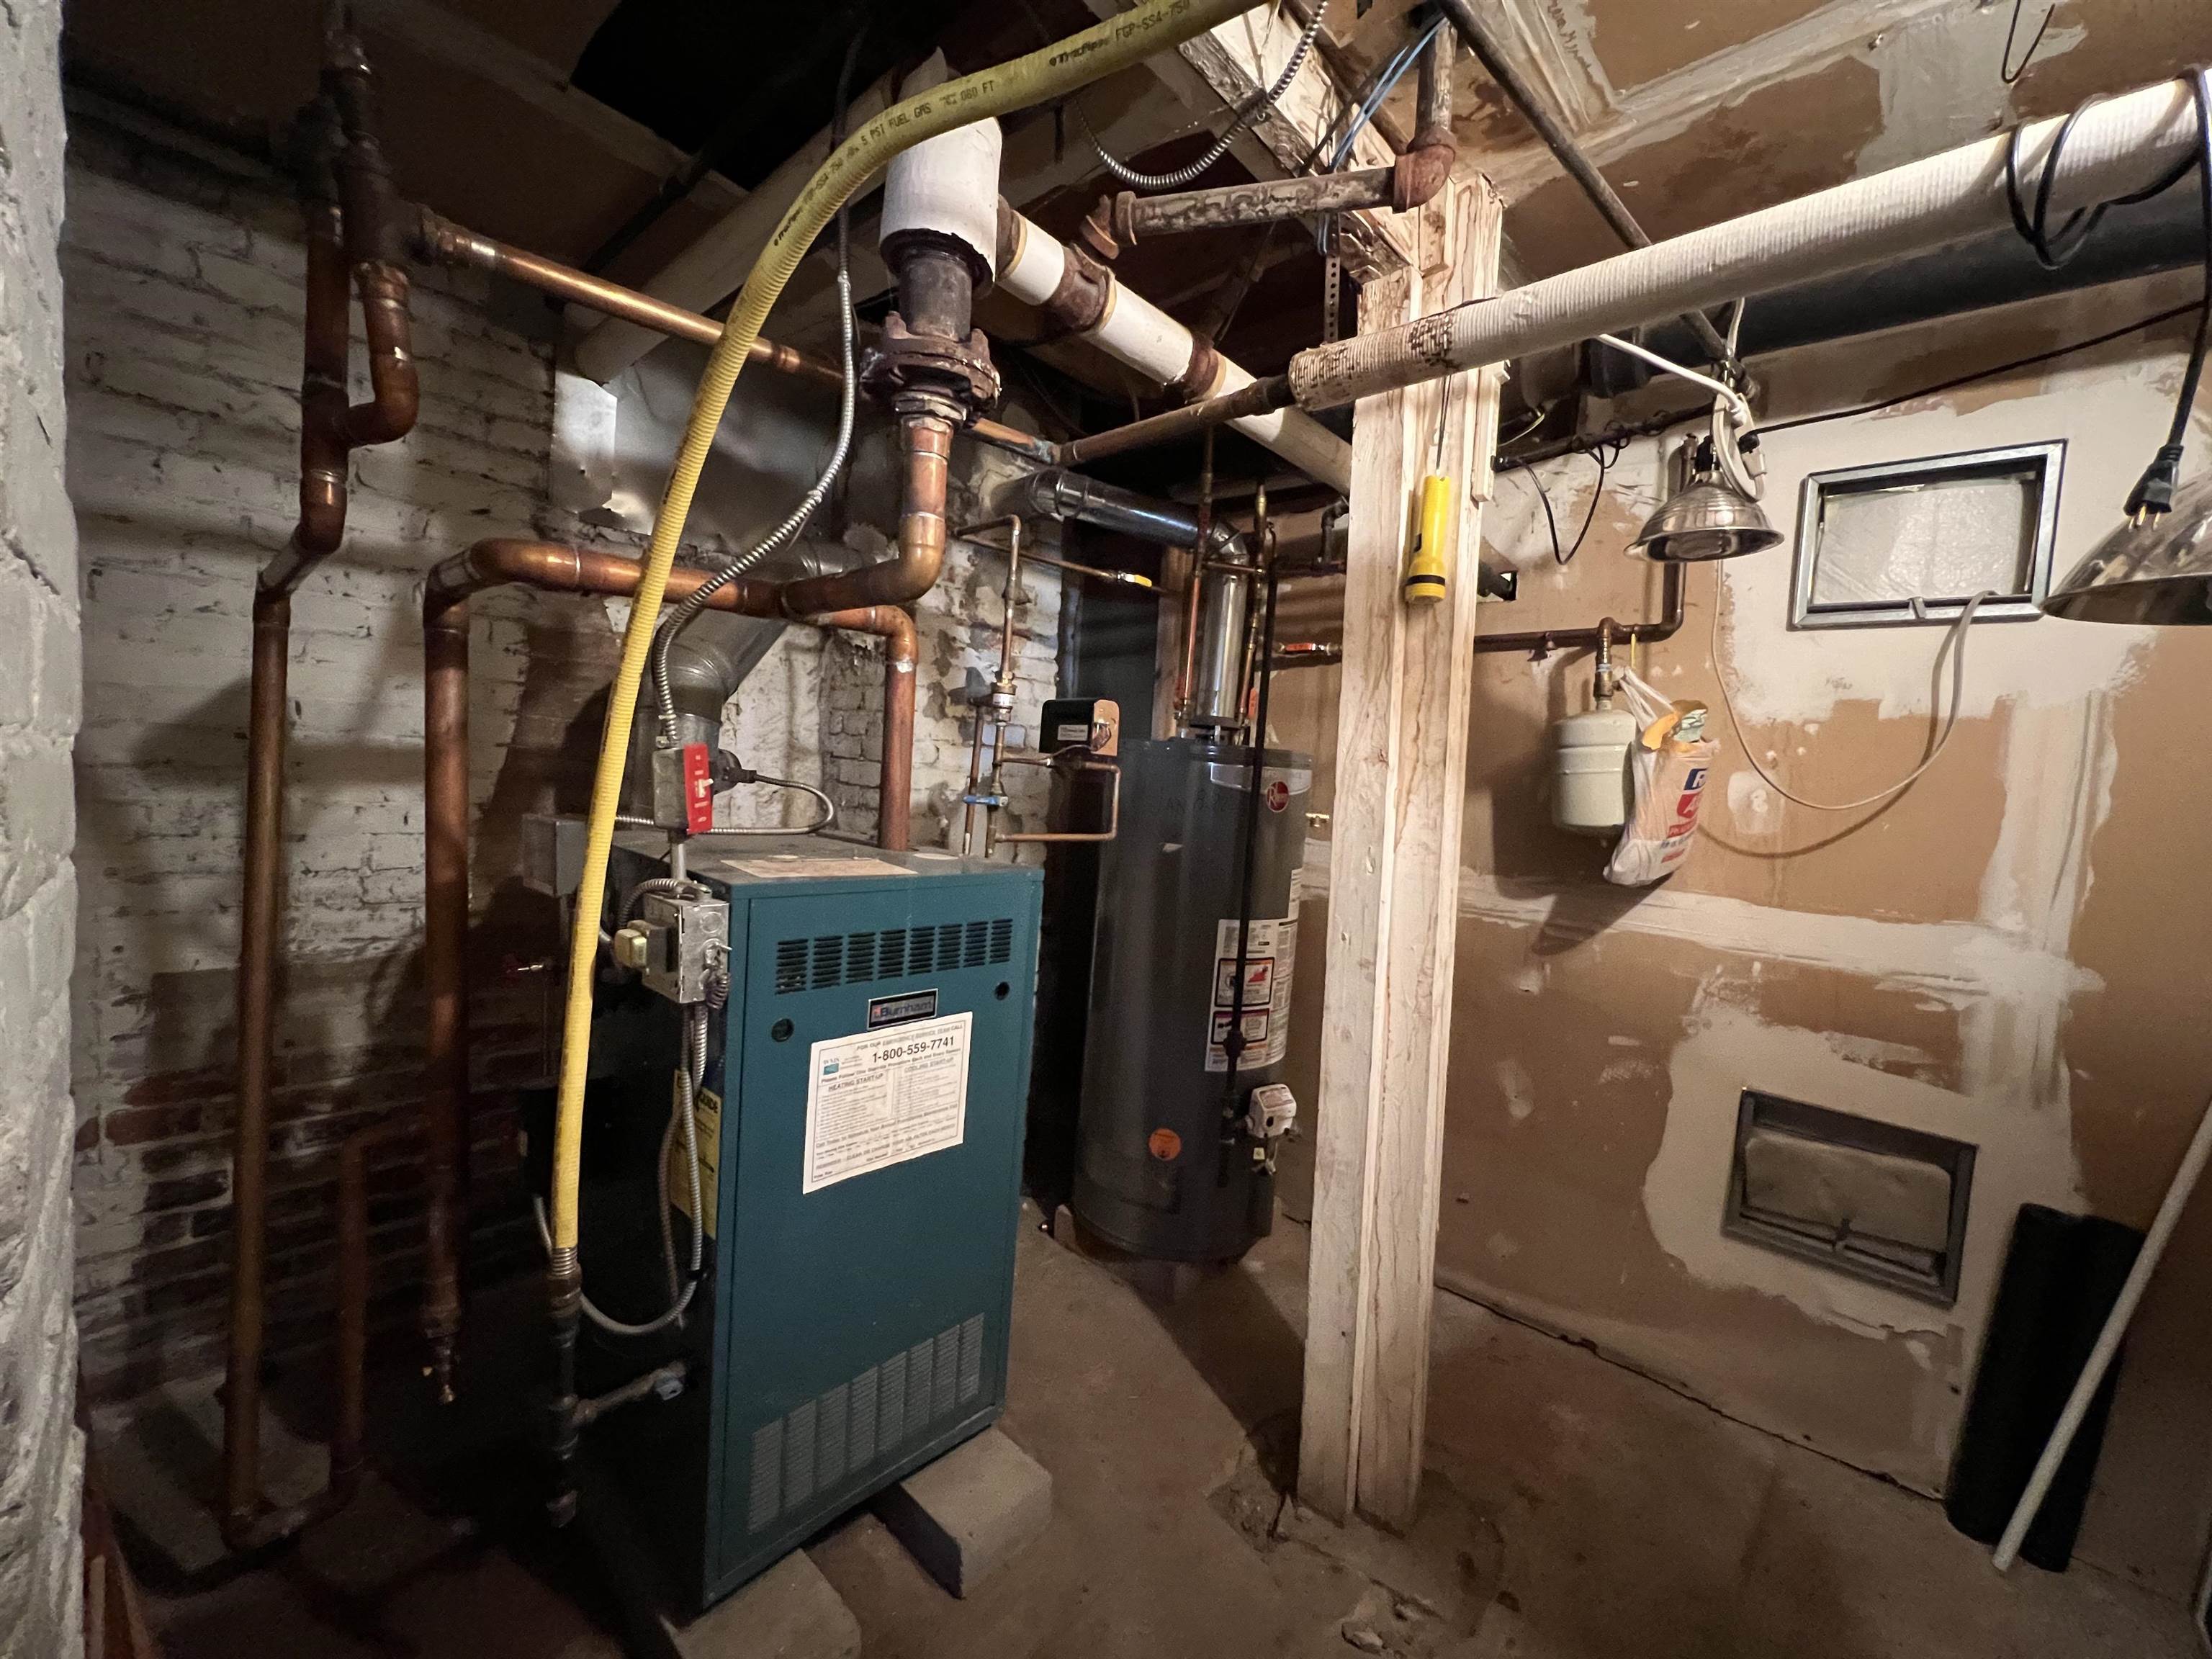 Furnace and Hot Water Heater that Services Entire Building